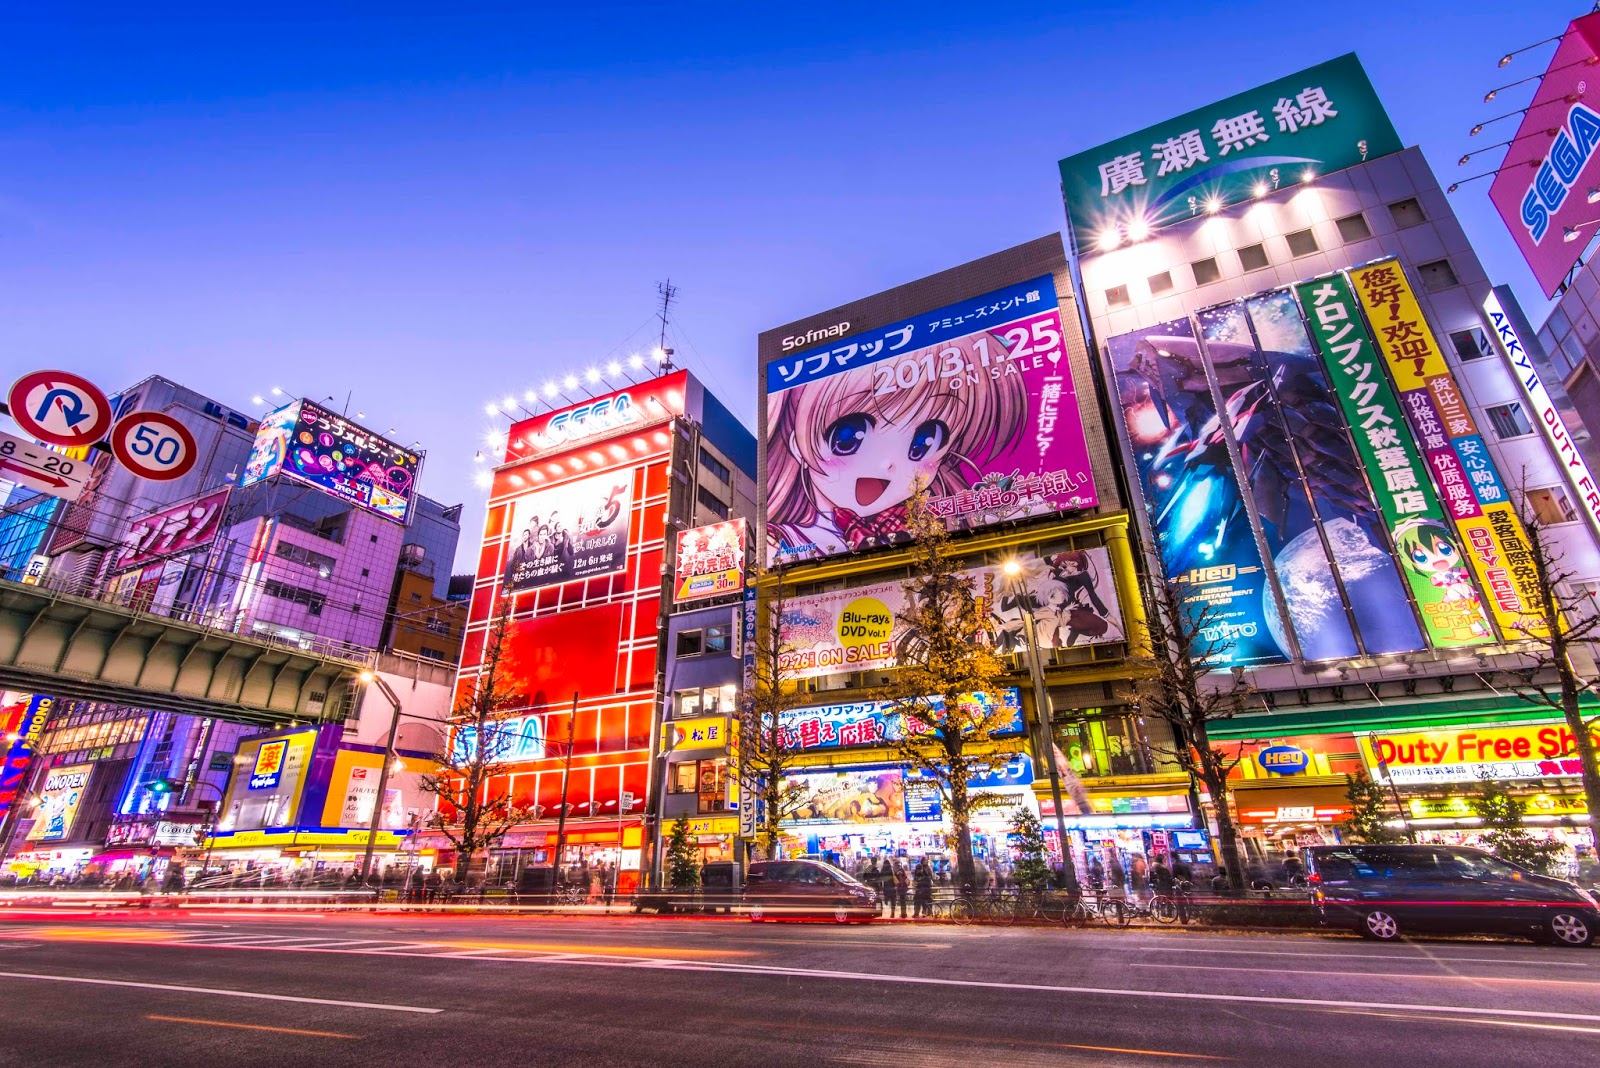 306 Akihabara Style Images, Stock Photos, 3D objects, & Vectors |  Shutterstock